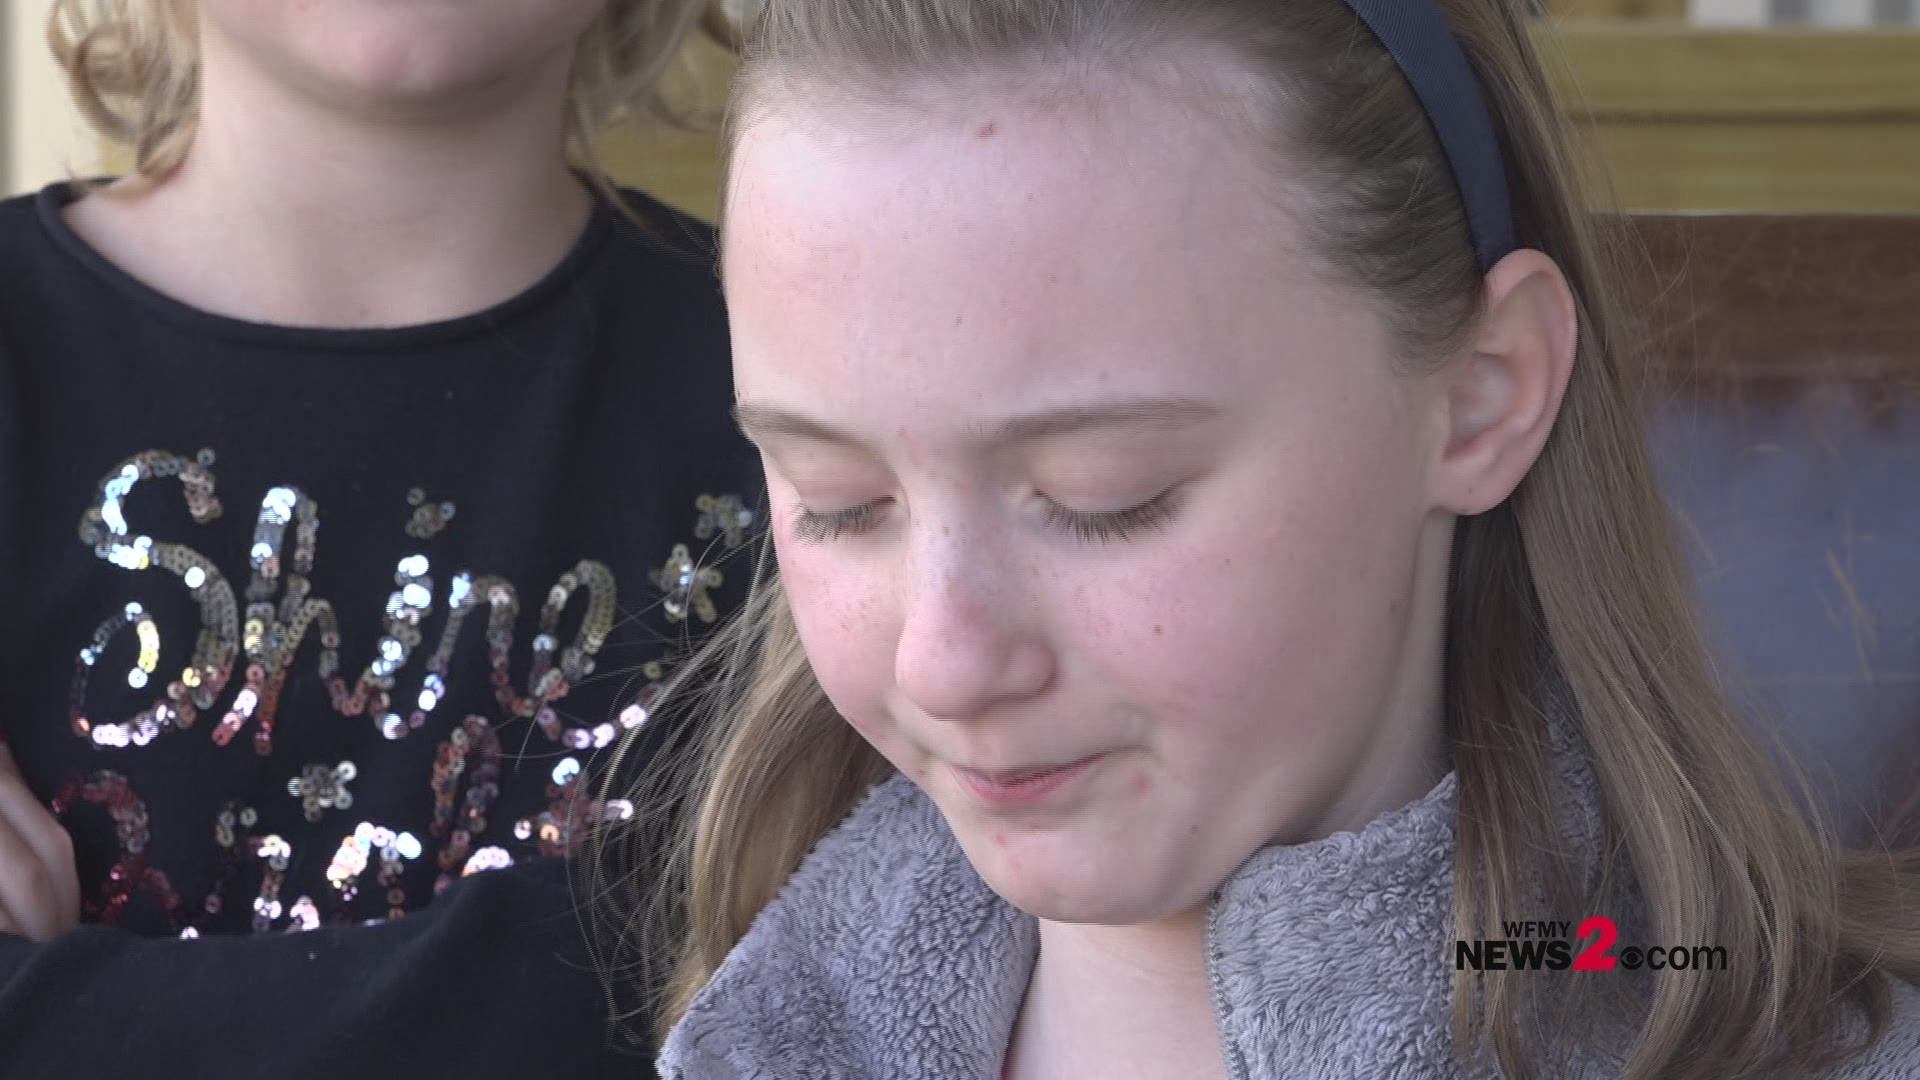 A 9-year-old Davie County is recovering from her injuries after being attacked by a coyote that also attacked the family's dog. The girl says the coyote bit her on her lower back and face.